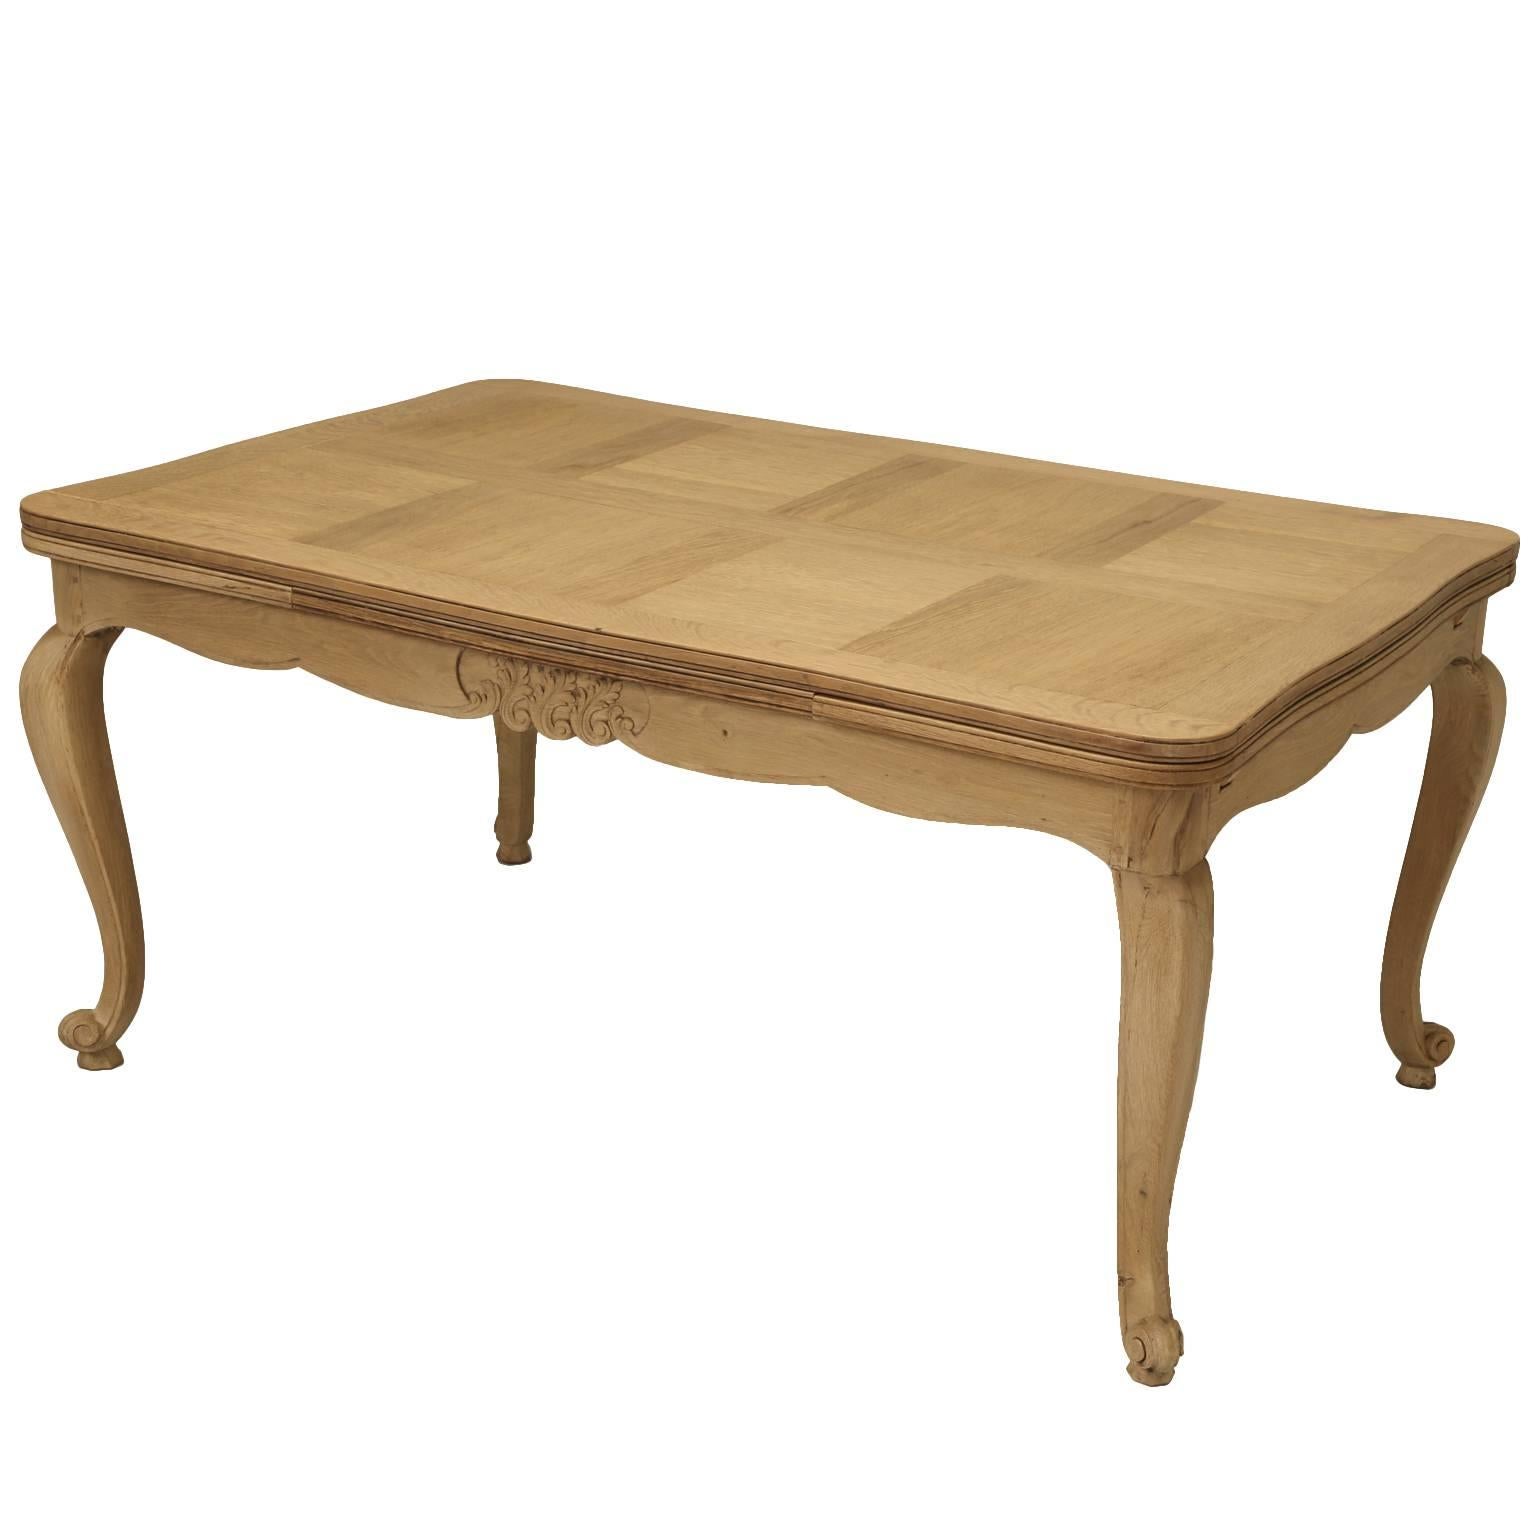 French Draw-Leaf Dining Table in Rift-Cut White Oak Natural Finish Seats (10)  For Sale